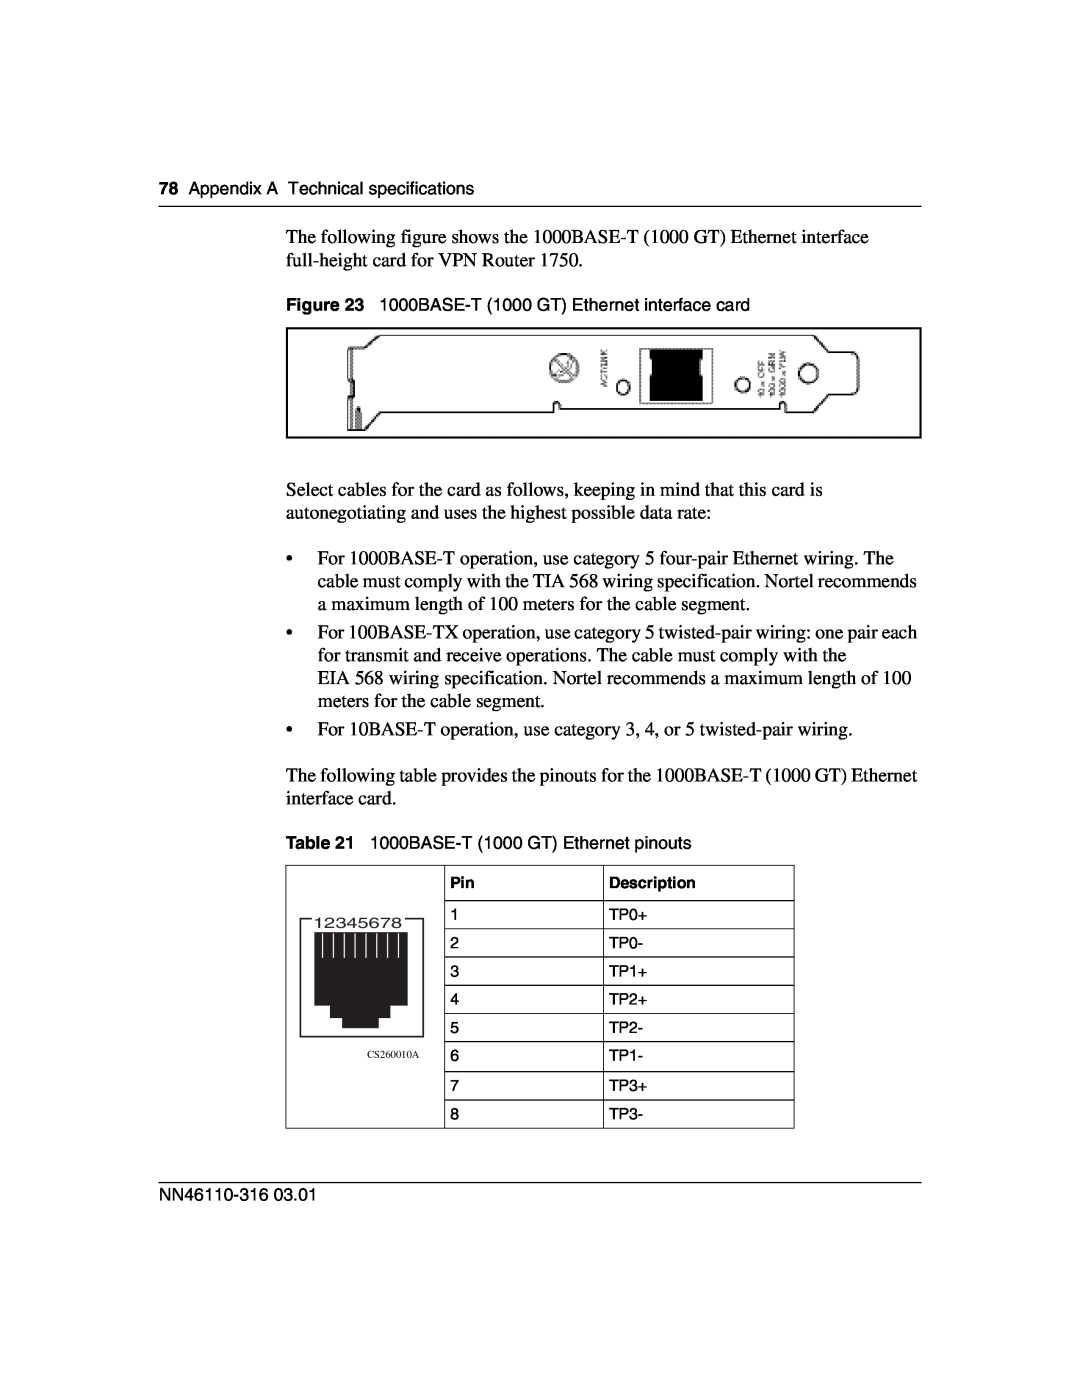 Nortel Networks 1750 manual For 10BASE-T operation, use category 3, 4, or 5 twisted-pair wiring 